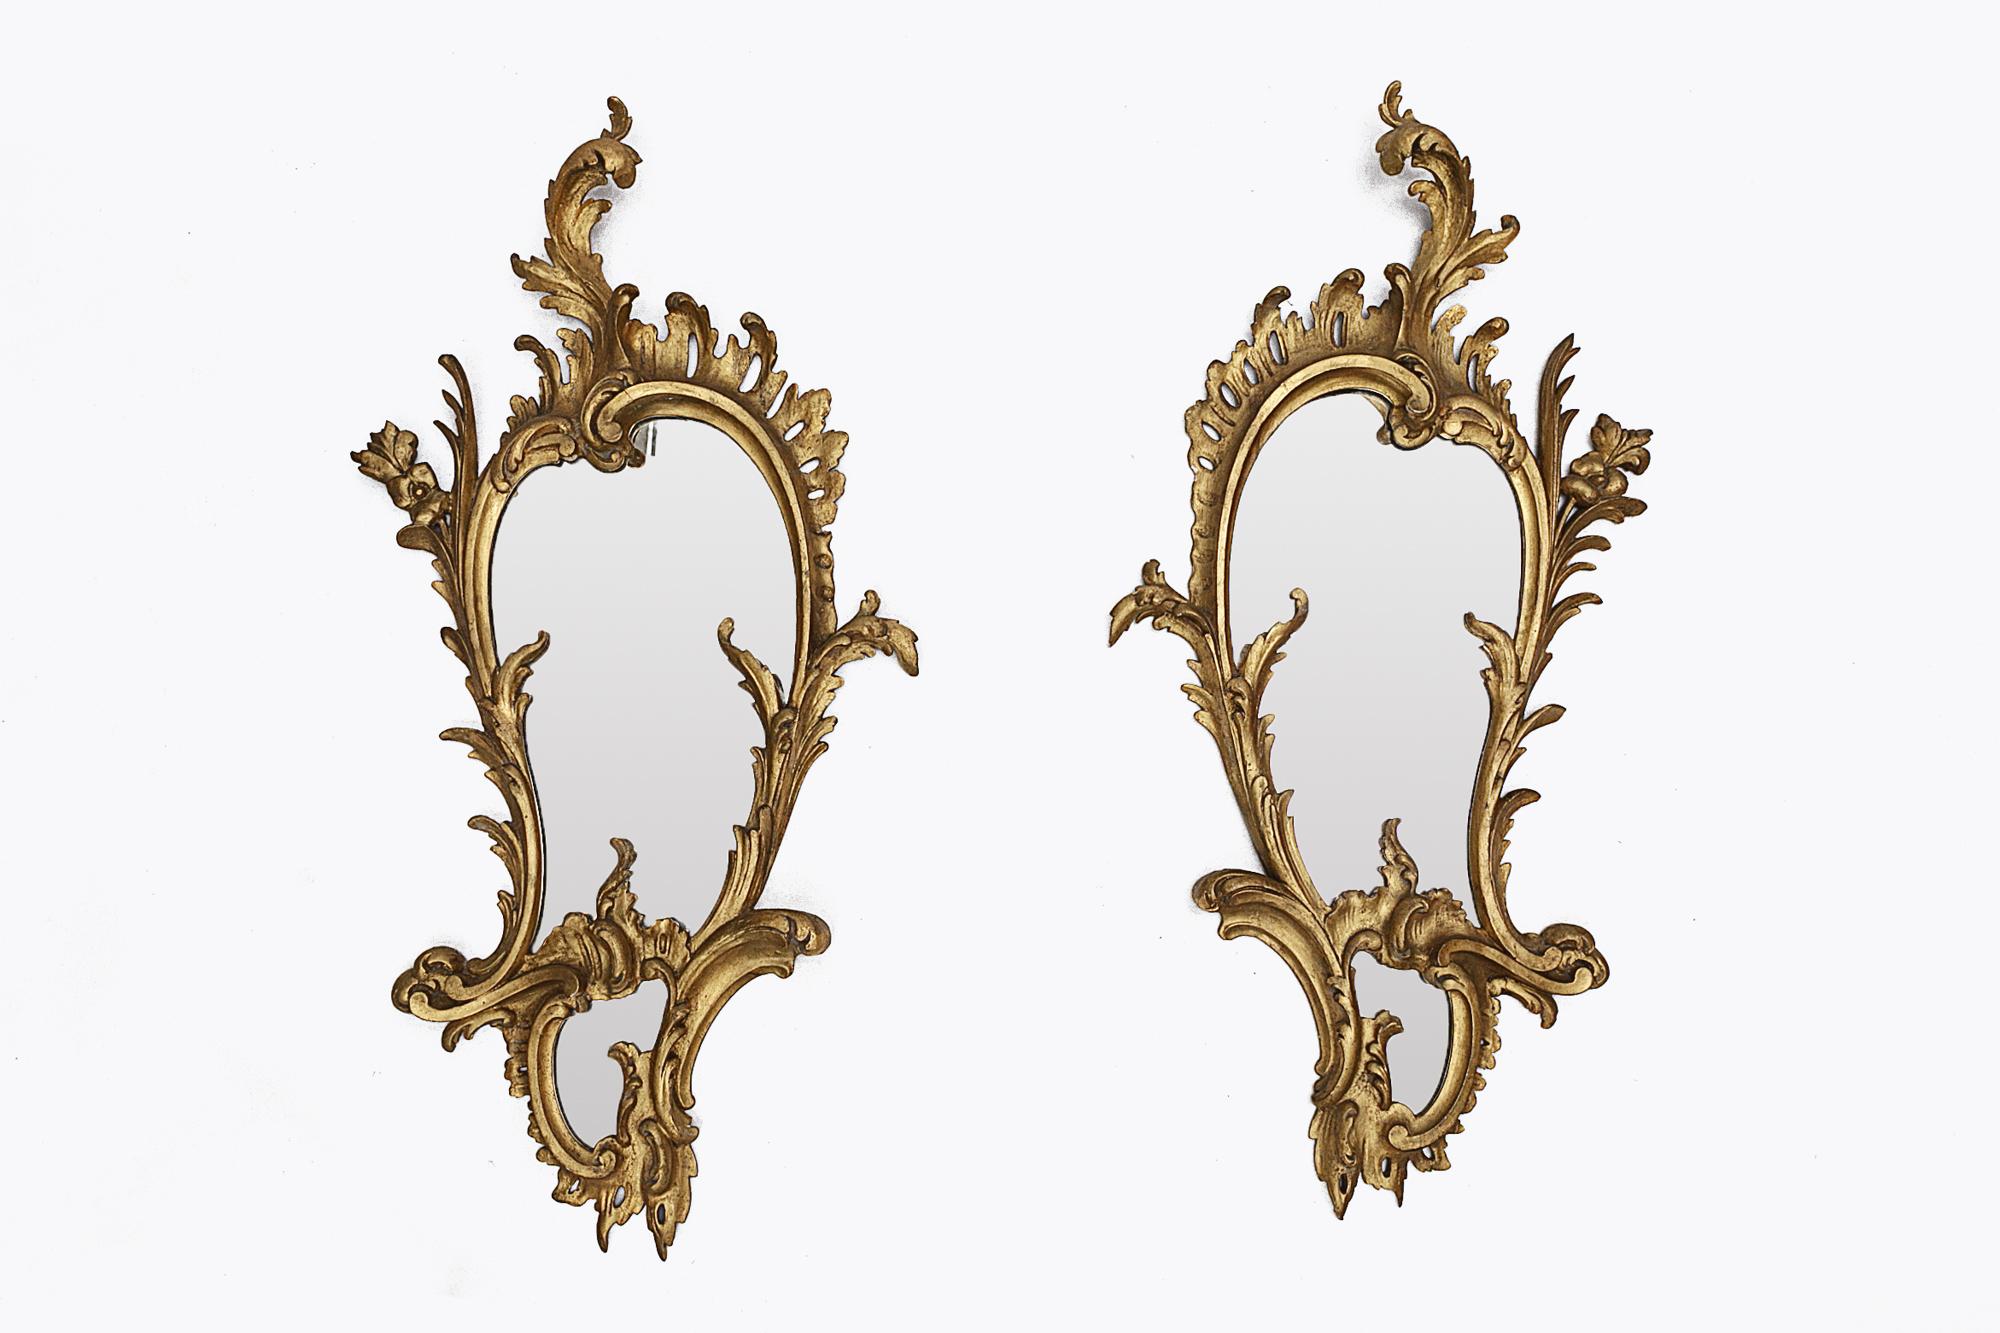 19th century Irish pair of giltwood mirrors of asymmetrical form, with scrolled acanthus leaf, floral and pierced rocaille frame, surmounted by an acanthus spray cresting, stamped to the reverse:

‘S.Bregazzi, Carver, Gilder and Picture Framer, 10